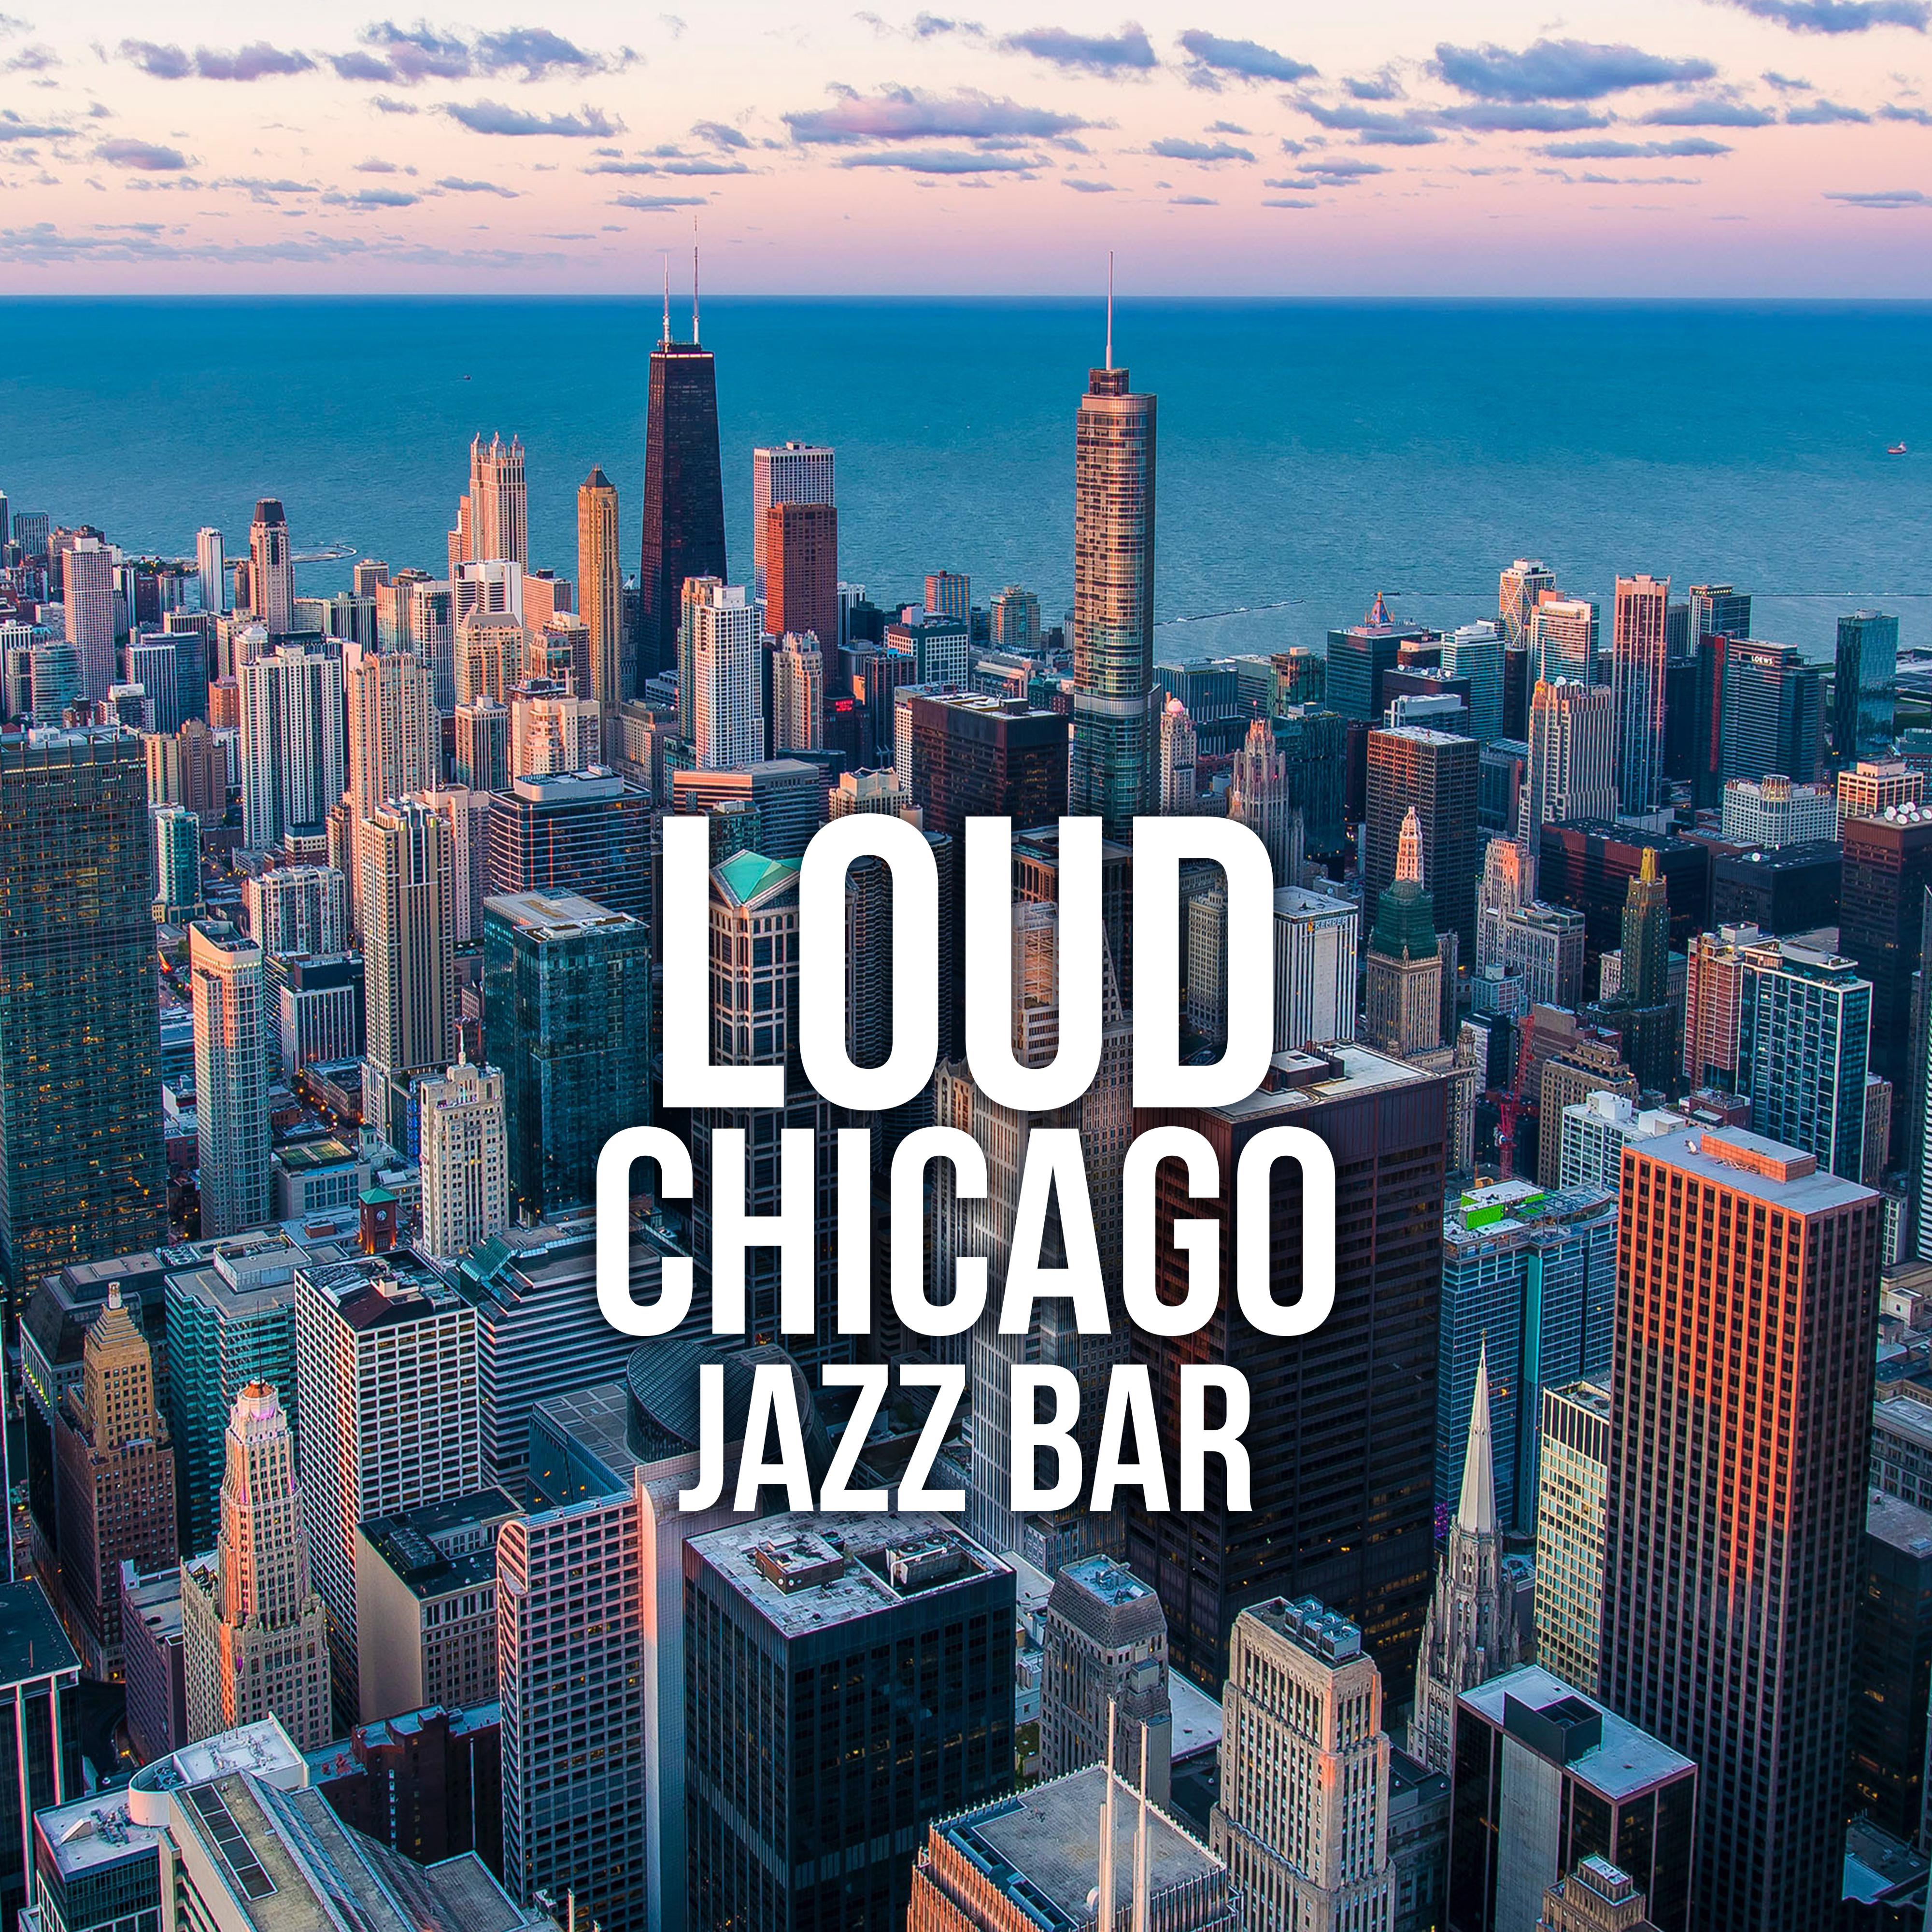 Loud Chicago Jazz Bar: 2019 Smooth Instrumental Jazz Compilation for Music Clubs, Restaurants, Friends Meeting, Relaxing at Home After Tough Day